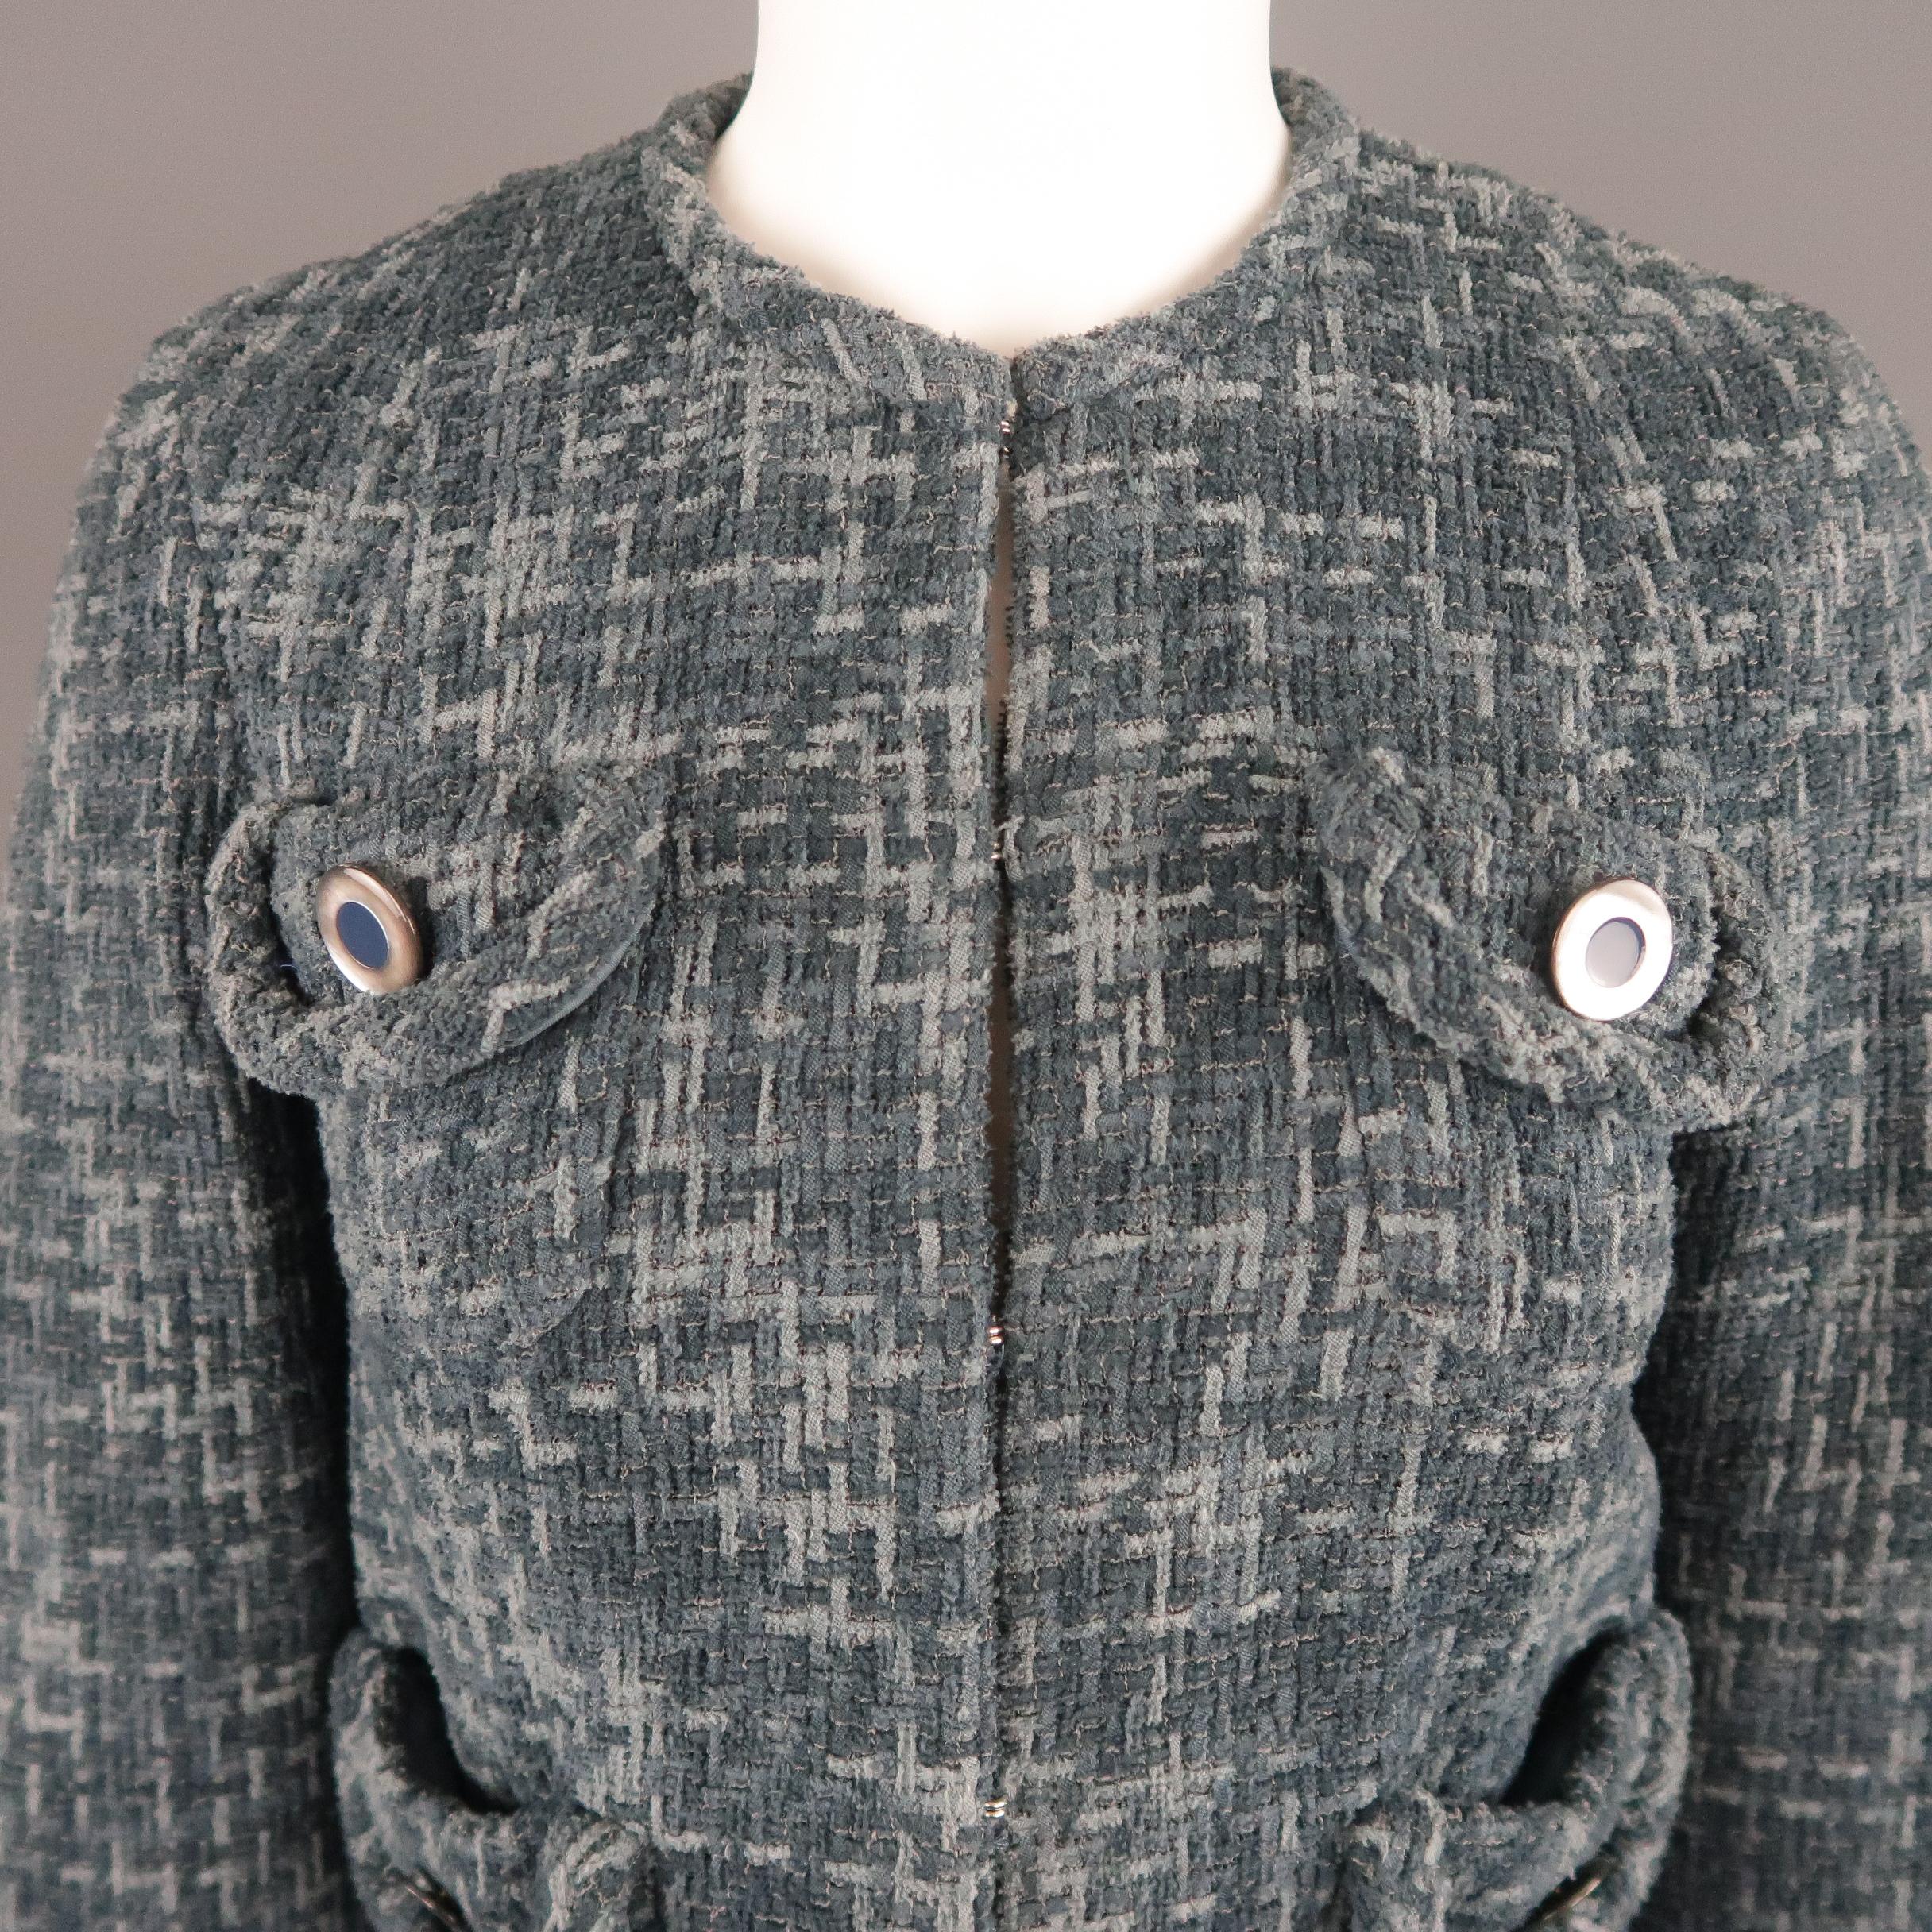 MARC JACOBS jacket comes in blue cotton blend tweed with a round, collarless neckline, hook eye closures, and open flap patch pockets with button detail. Made in USA.
 
Excellent Pre-Owned Condition.
Marked: 6
 
Measurements:
 
Shoulder: 14